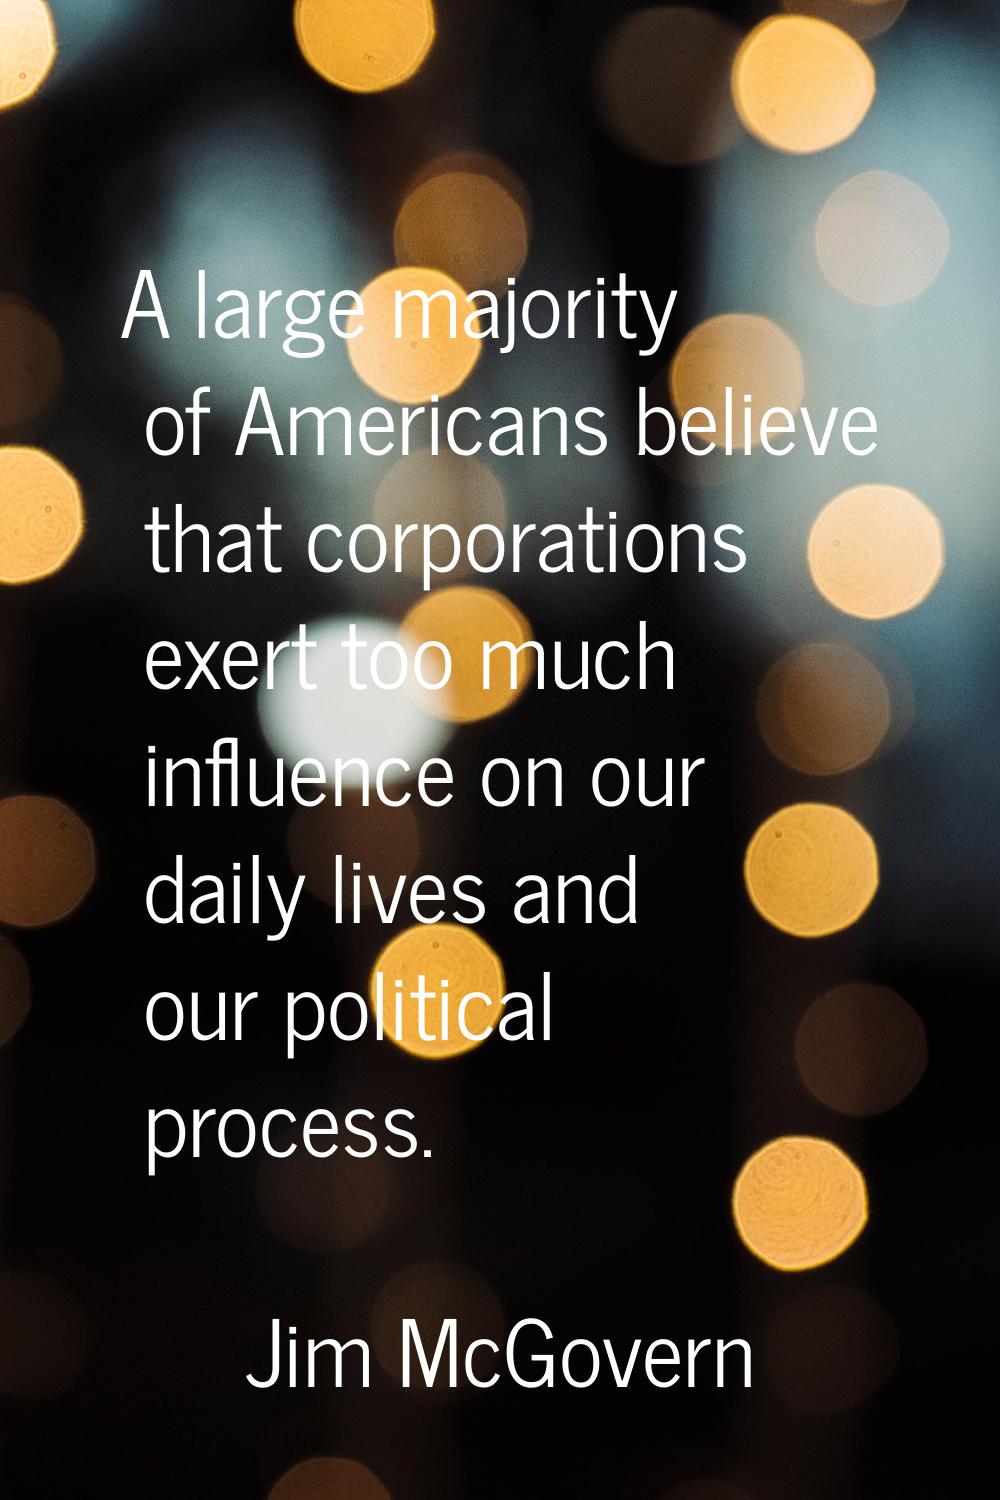 A large majority of Americans believe that corporations exert too much influence on our daily lives